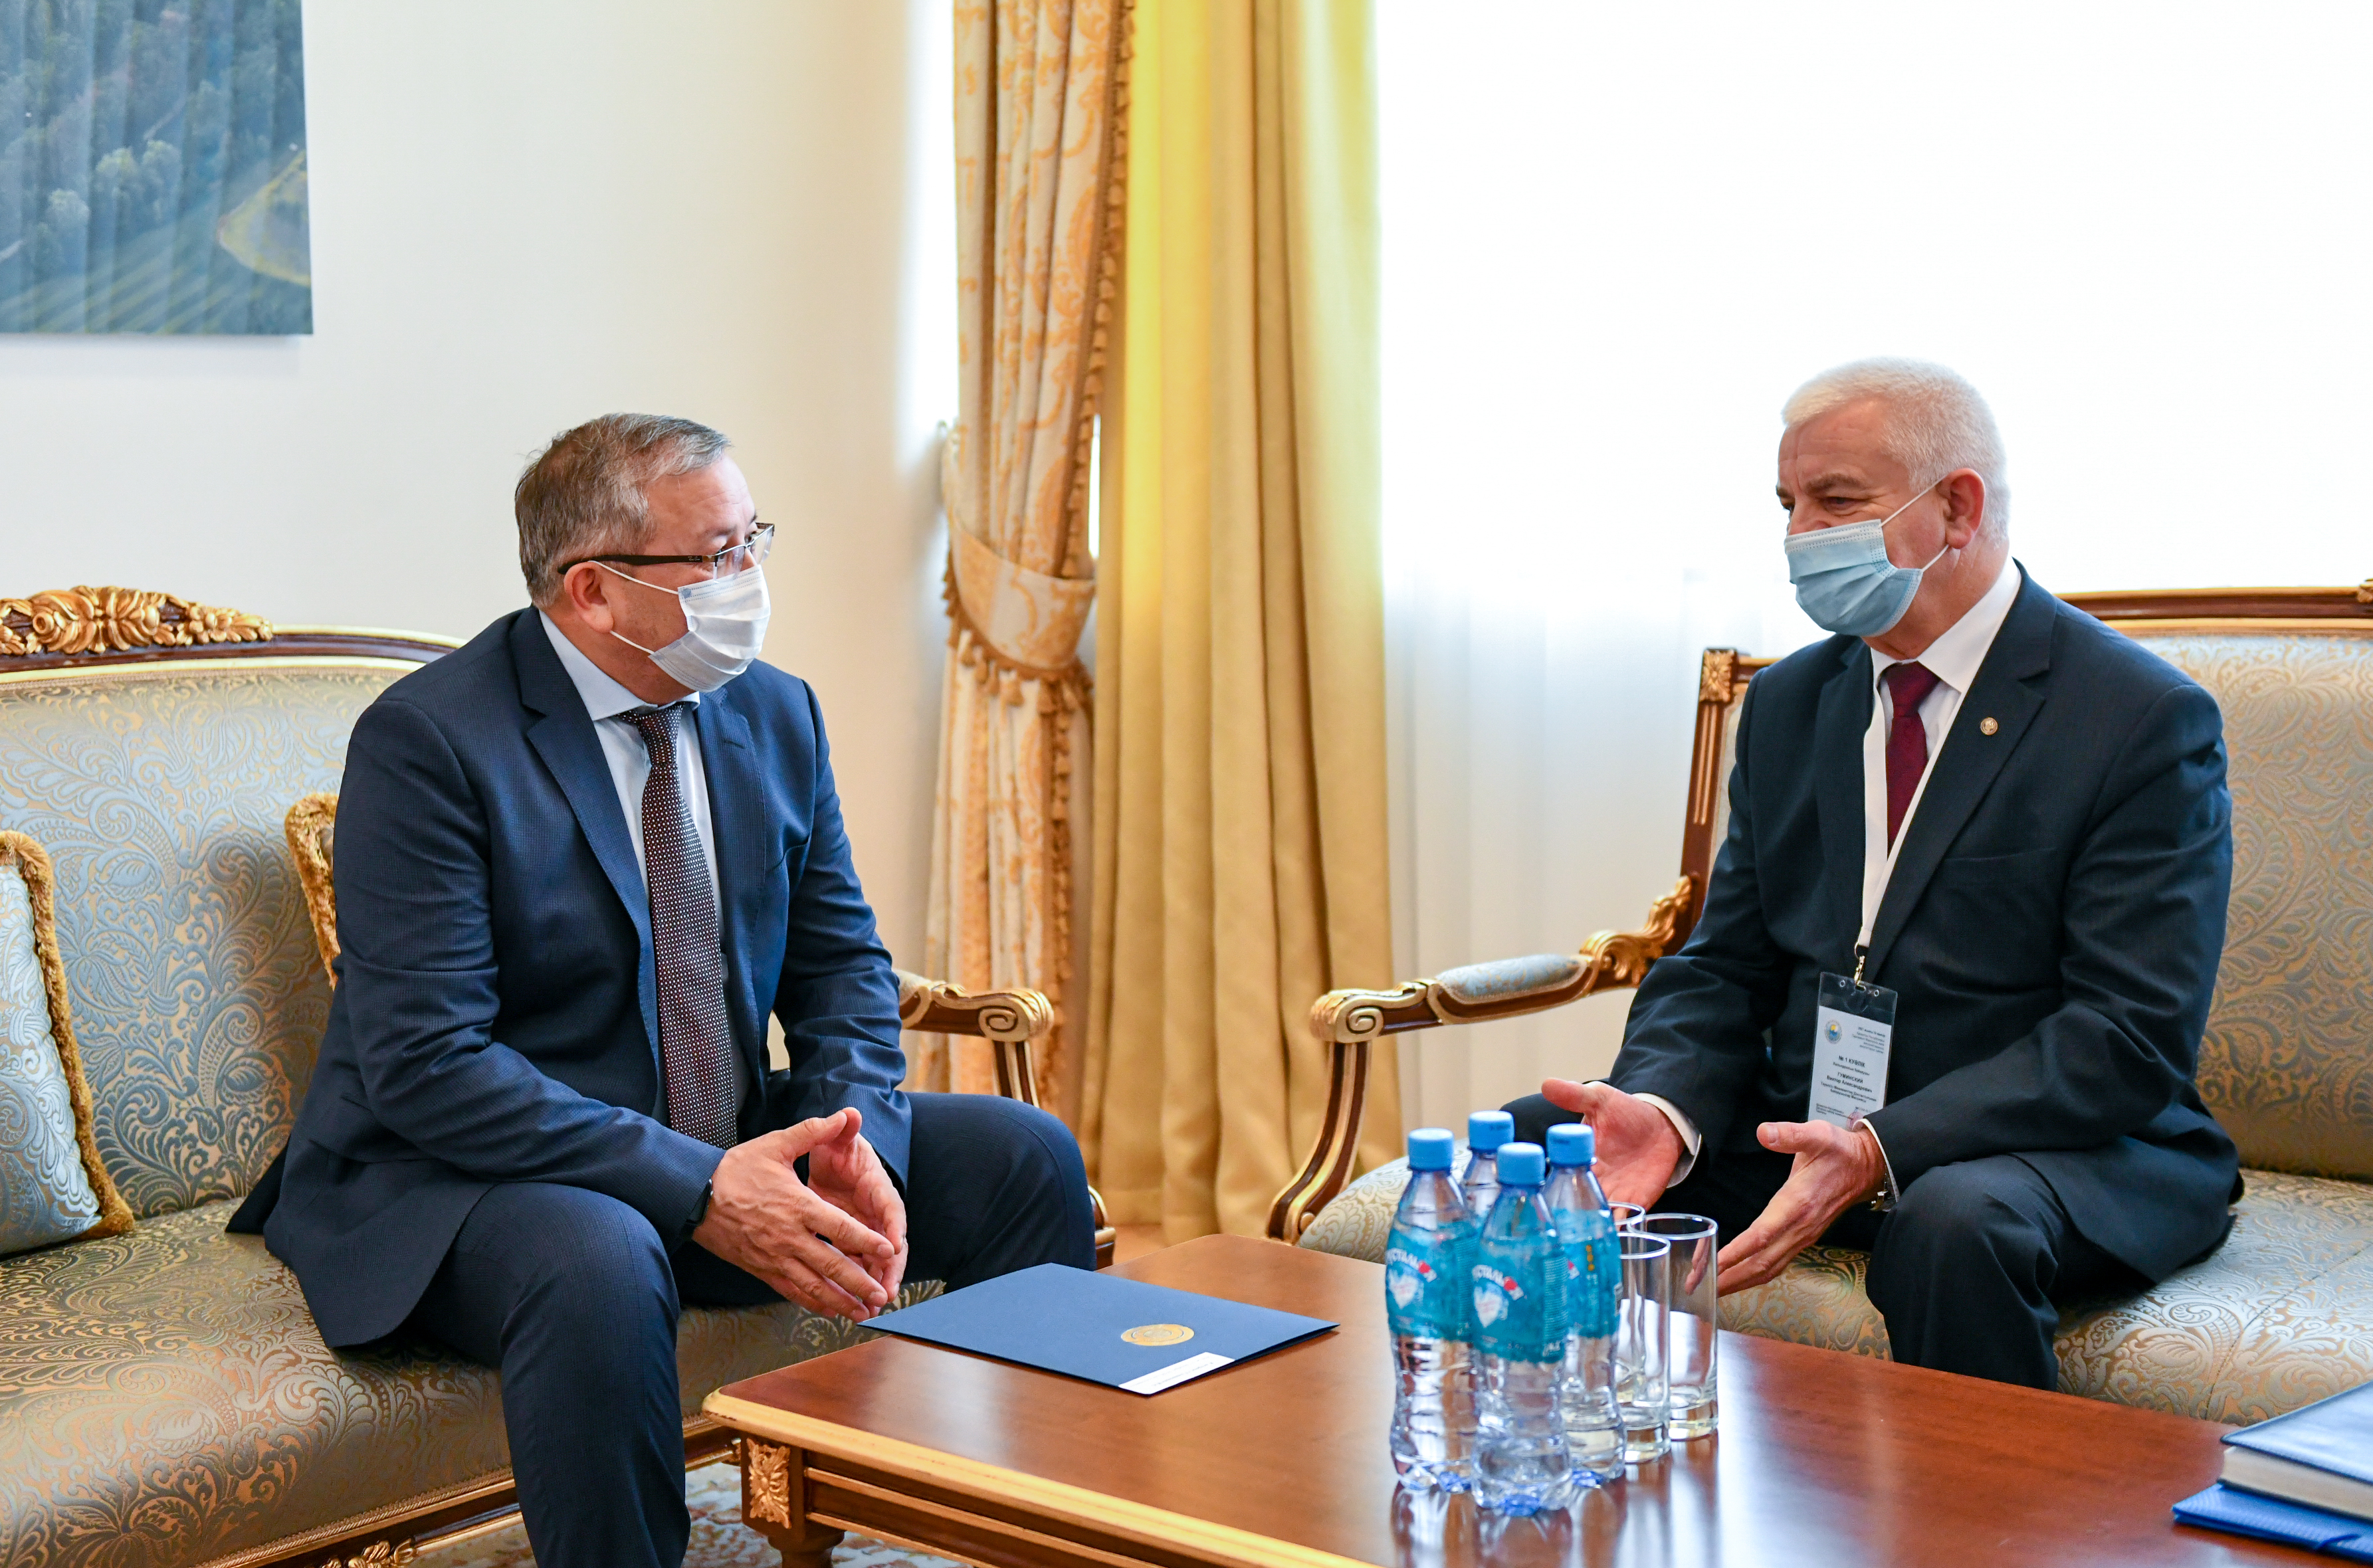 Deputy Minister received a visit from the Head of the CIS Observer Mission